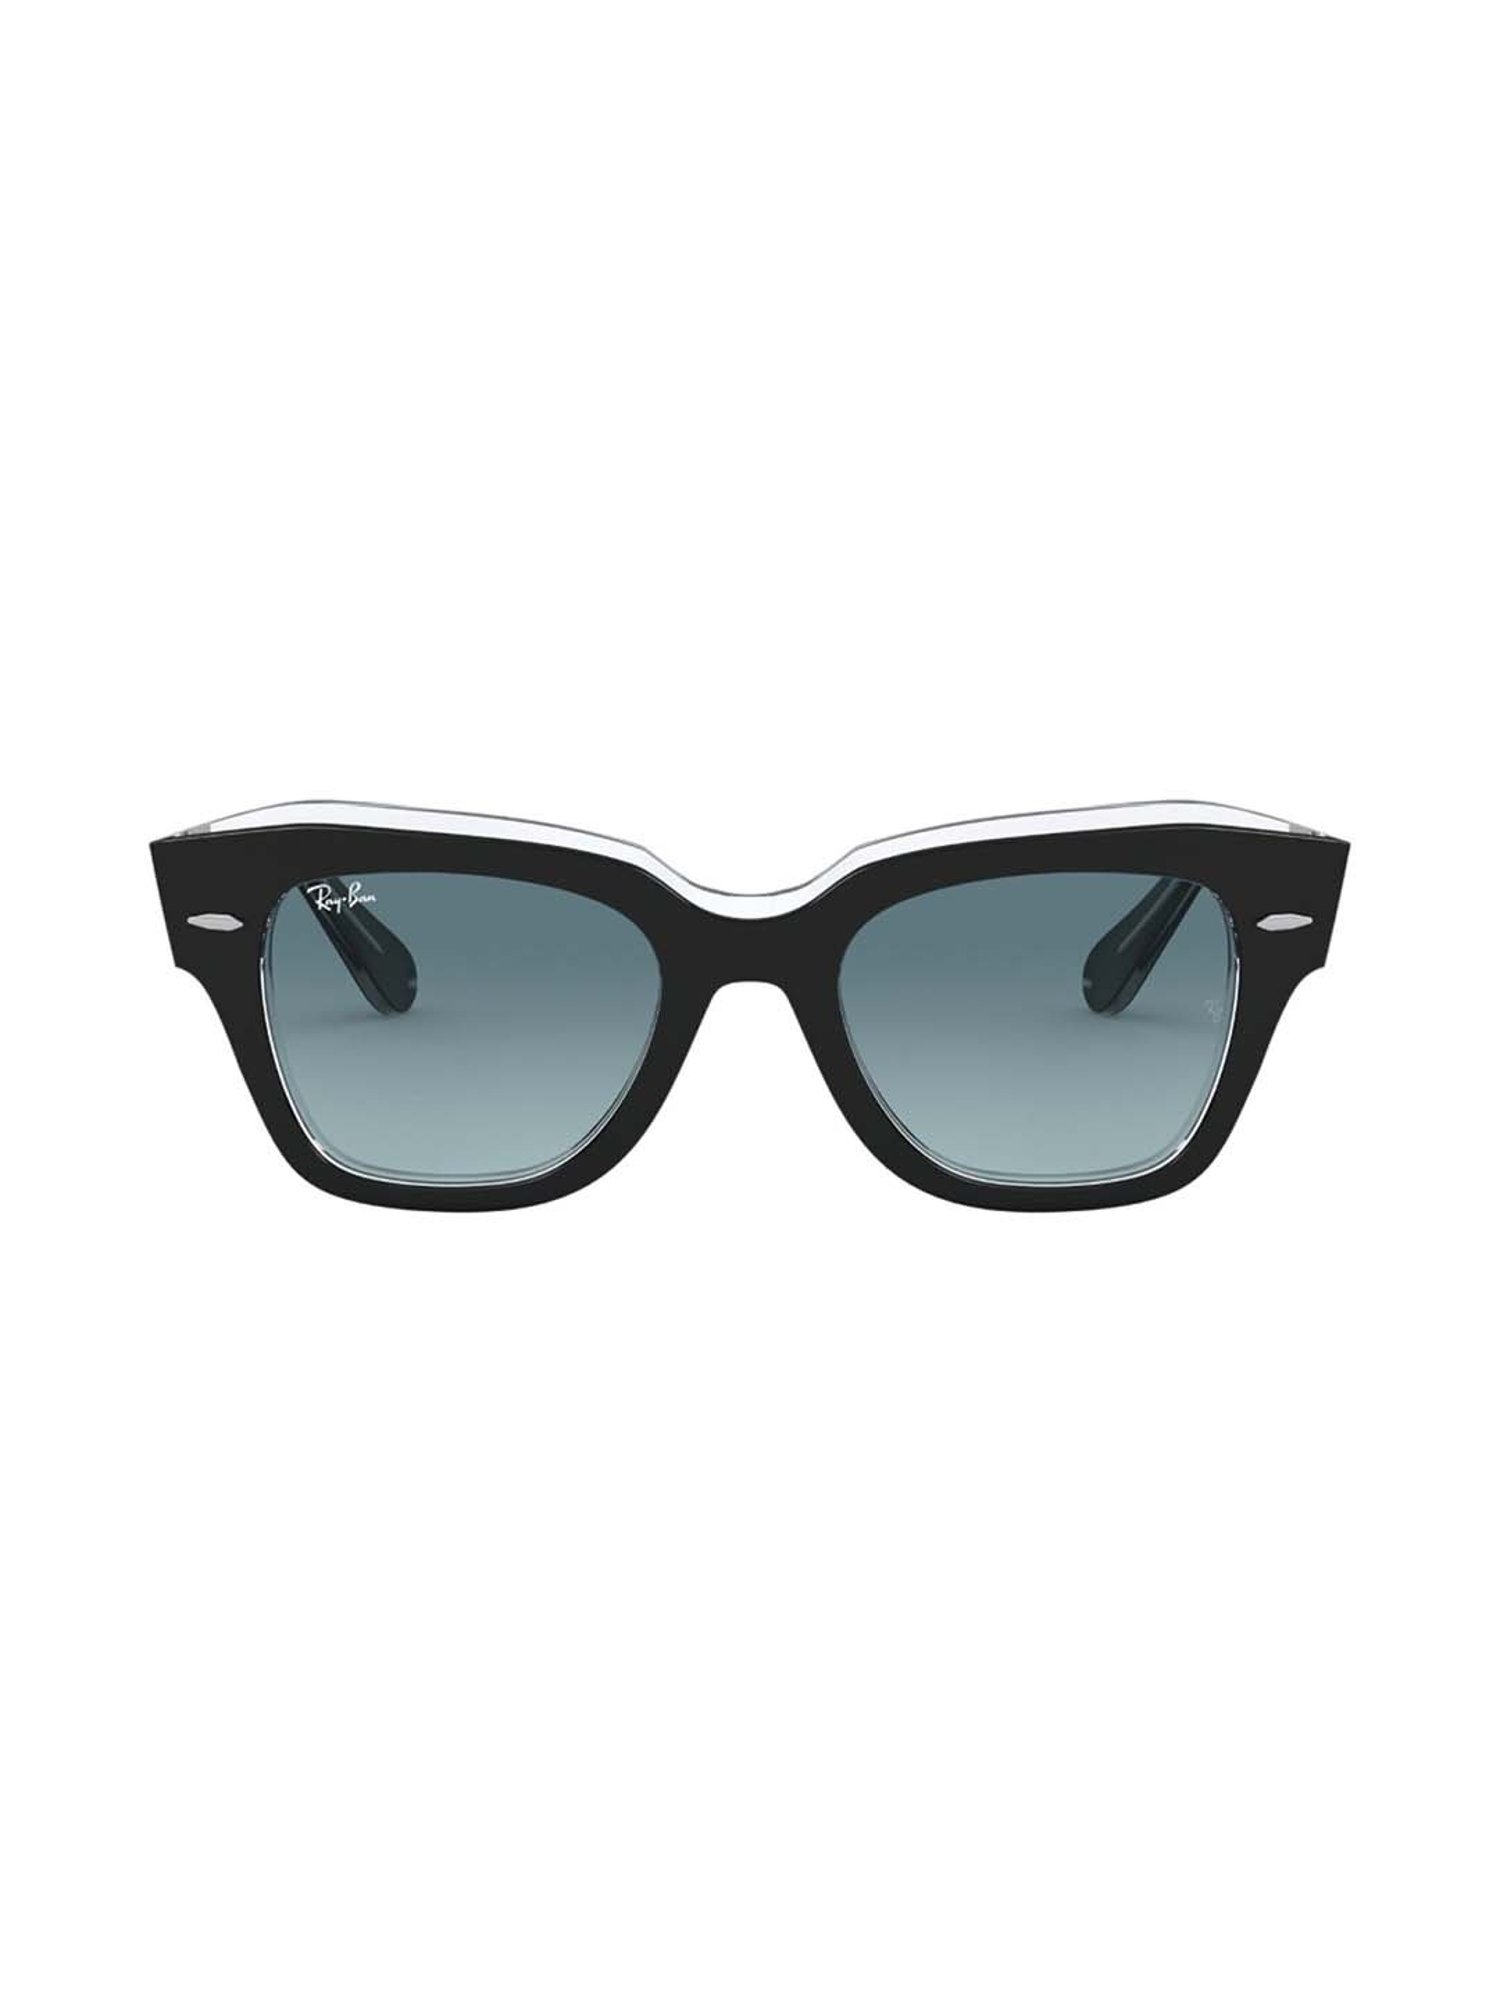 Buy RAY BAN FAKE Online In India - Etsy India